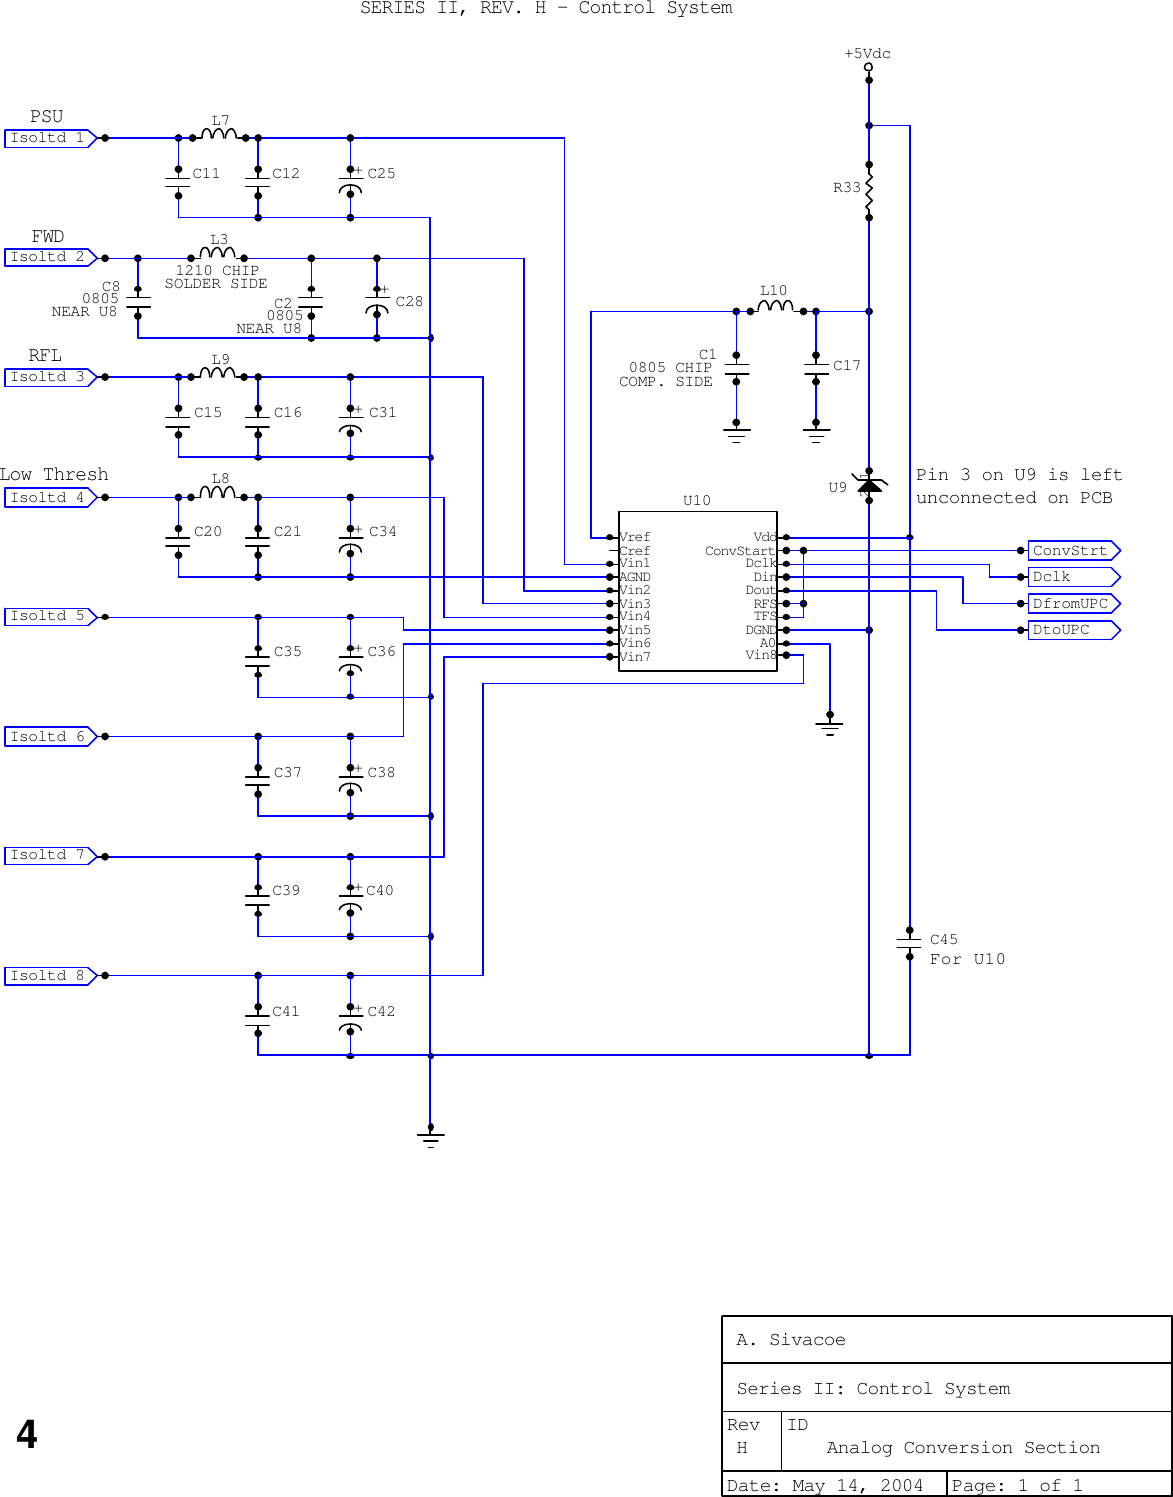 SERIES II, REV. H - Control System4Pin 3 on U9 is left unconnected on PCBFor U10FWDPSURFLLow ThreshC20L8C15L9NEAR U8C80805 SOLDER SIDEL31210 CHIPC11L7C17COMP. SIDEC10805 CHIPL102 1U9+5VdcC45+C42C41+C40C39+C38C37+C36C35+C34C21+C31C16+C28NEAR U8C20805C12+C25DtoUPC  DfromUPCDclk    ConvStrtIsoltd 1Isoltd 2Isoltd 3Isoltd 4Isoltd 5Isoltd 6Isoltd 7Isoltd 8VrefCrefVin1AGNDVin2Vin3Vin4Vin5Vin6Vin7 Vin8A0DGNDTFSRFSDoutDinDclkConvStartVddU10R33A. SivacoeSeries II: Control SystemH Analog Conversion SectionDate: May 14, 2004 Page: 1 of 1Rev ID